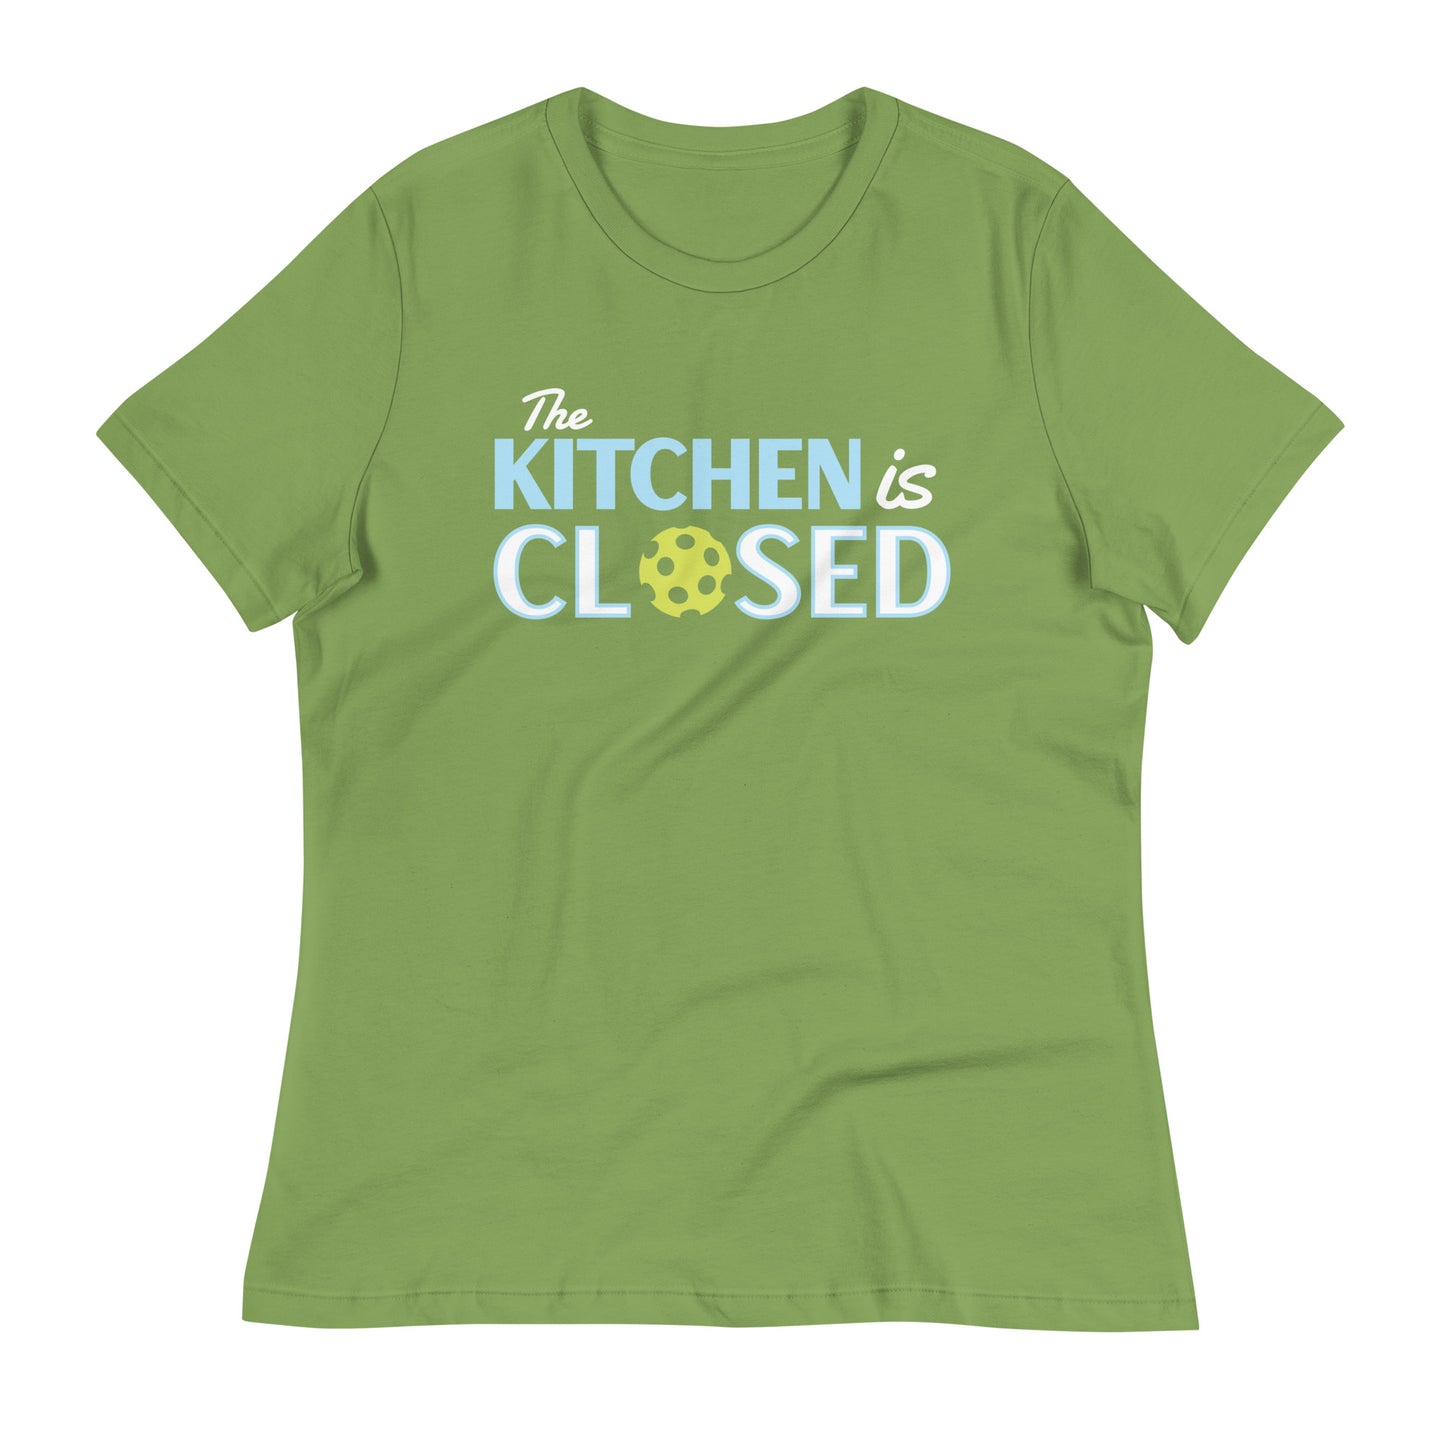 The Kitchen Is Closed Women's Signature Tee